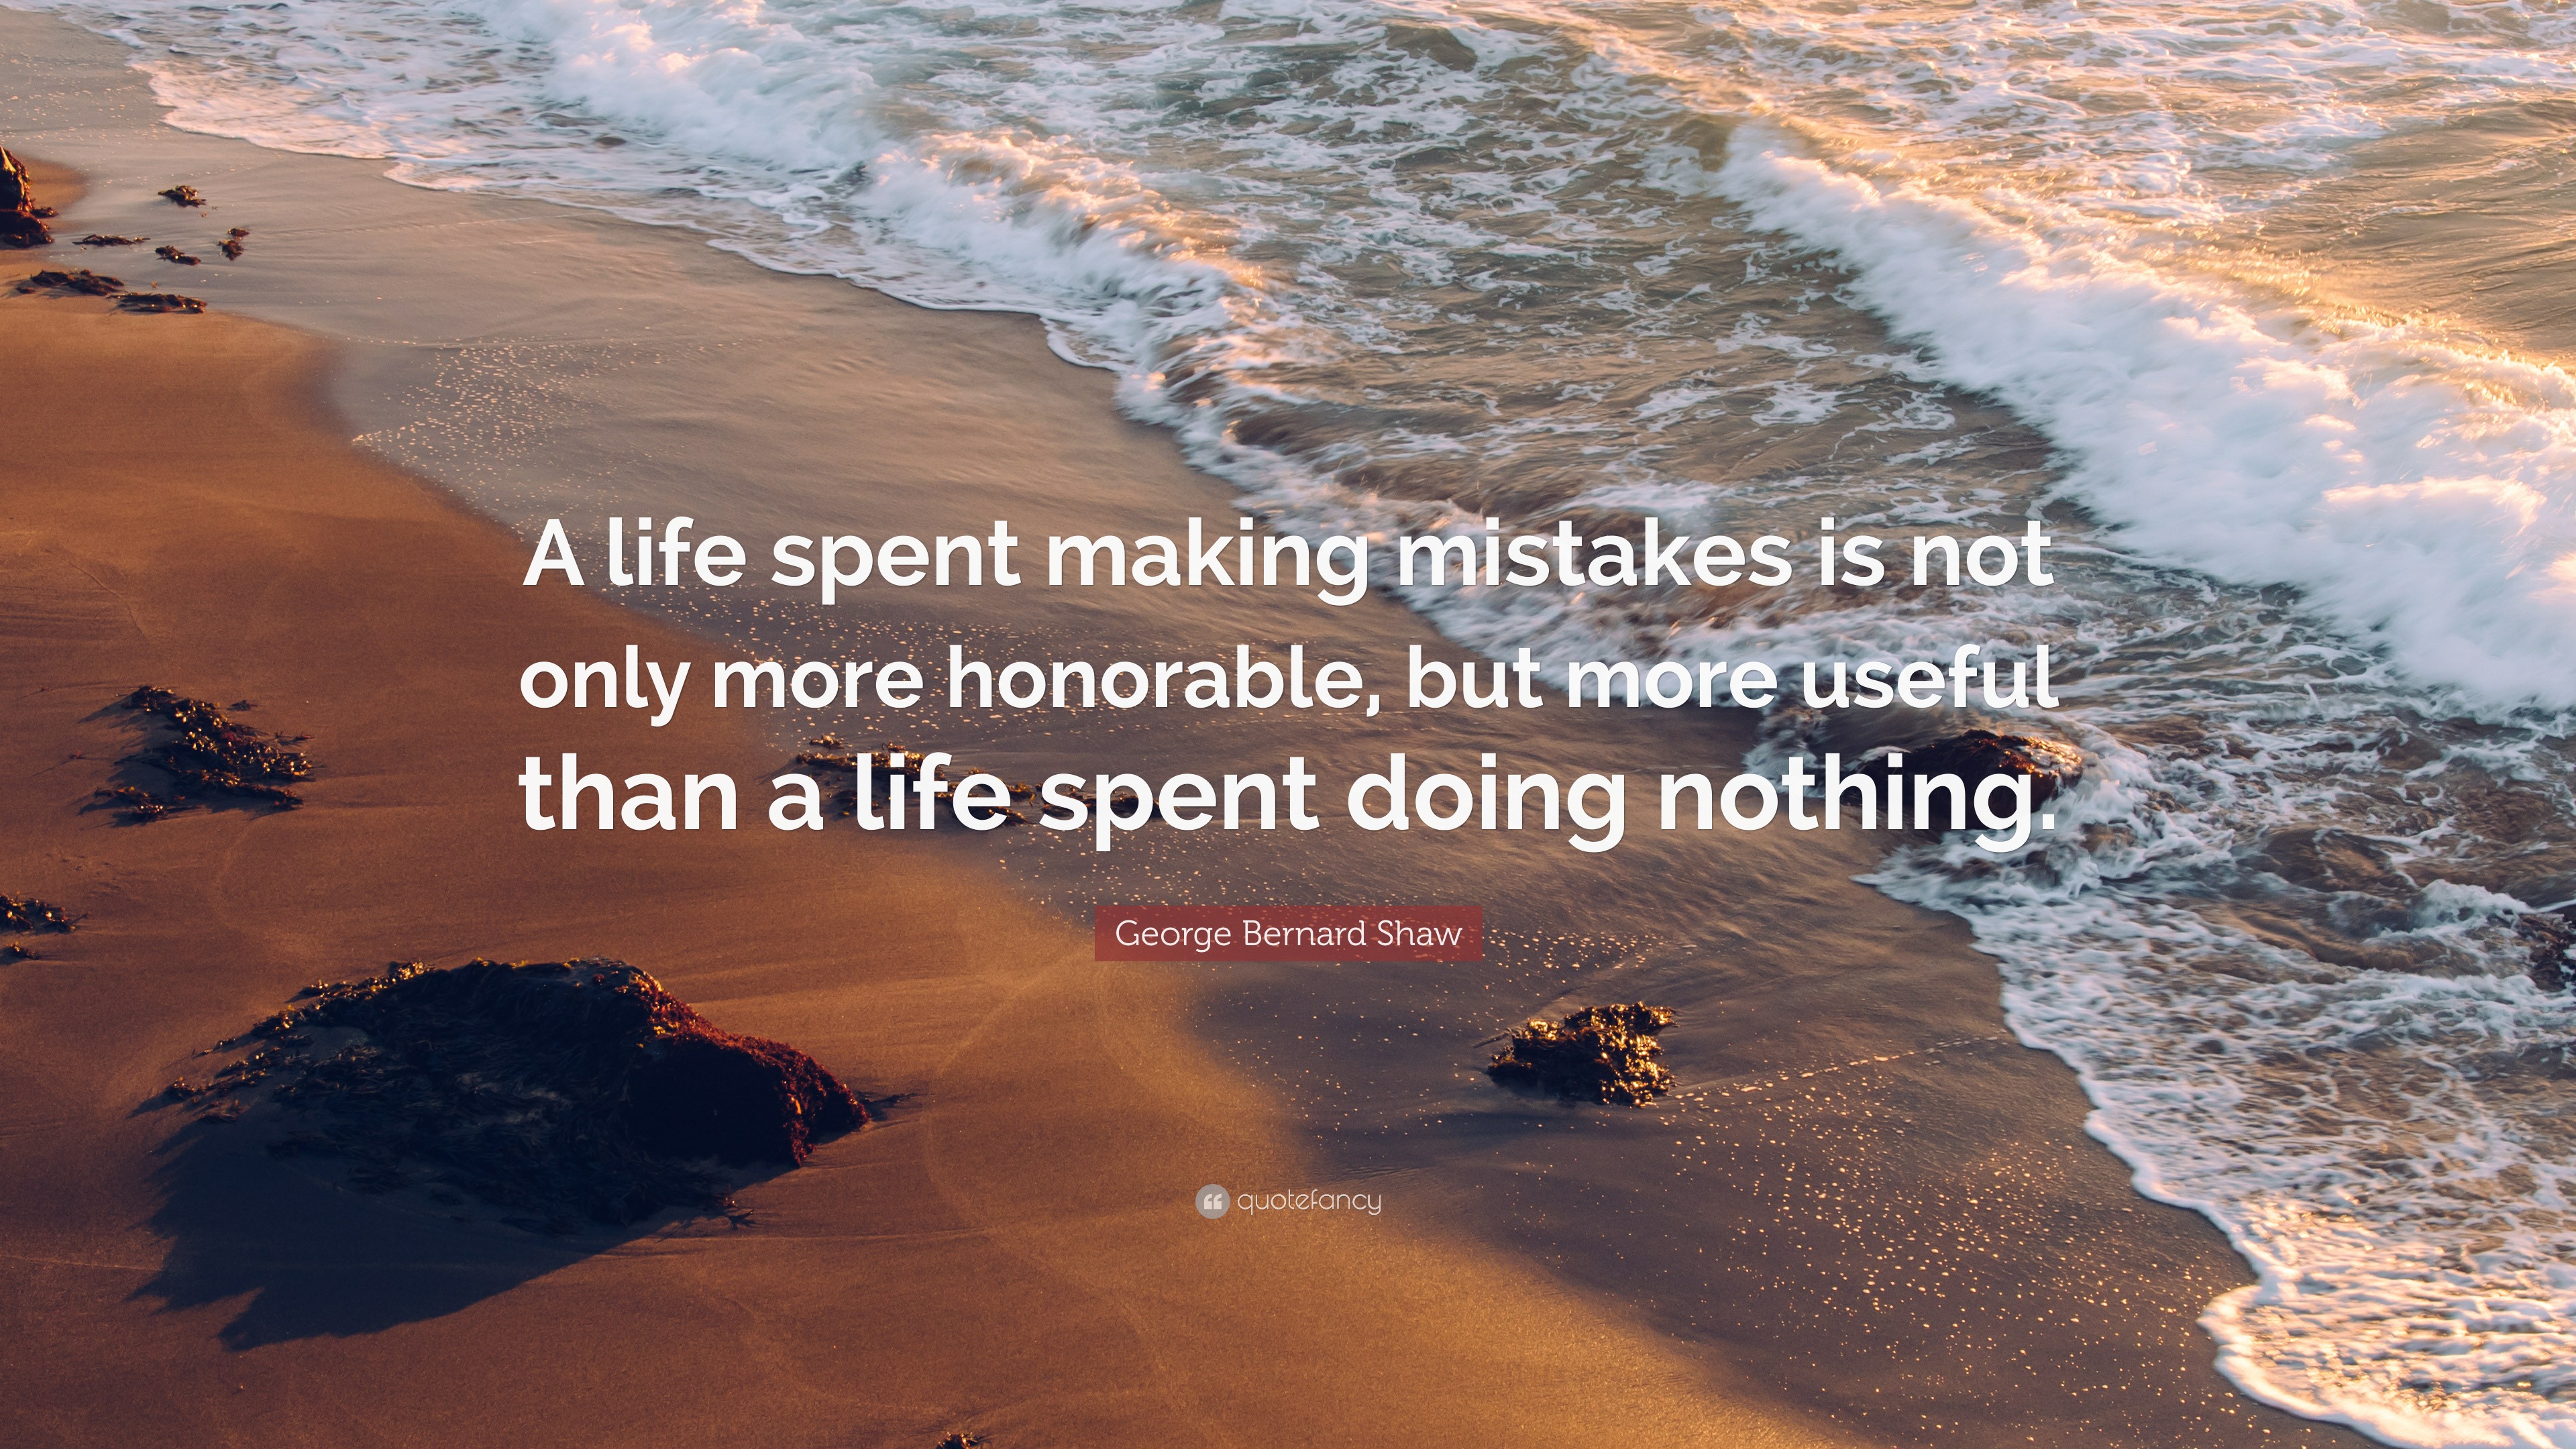 George Bernard Shaw Quote: “A life spent making mistakes is not only